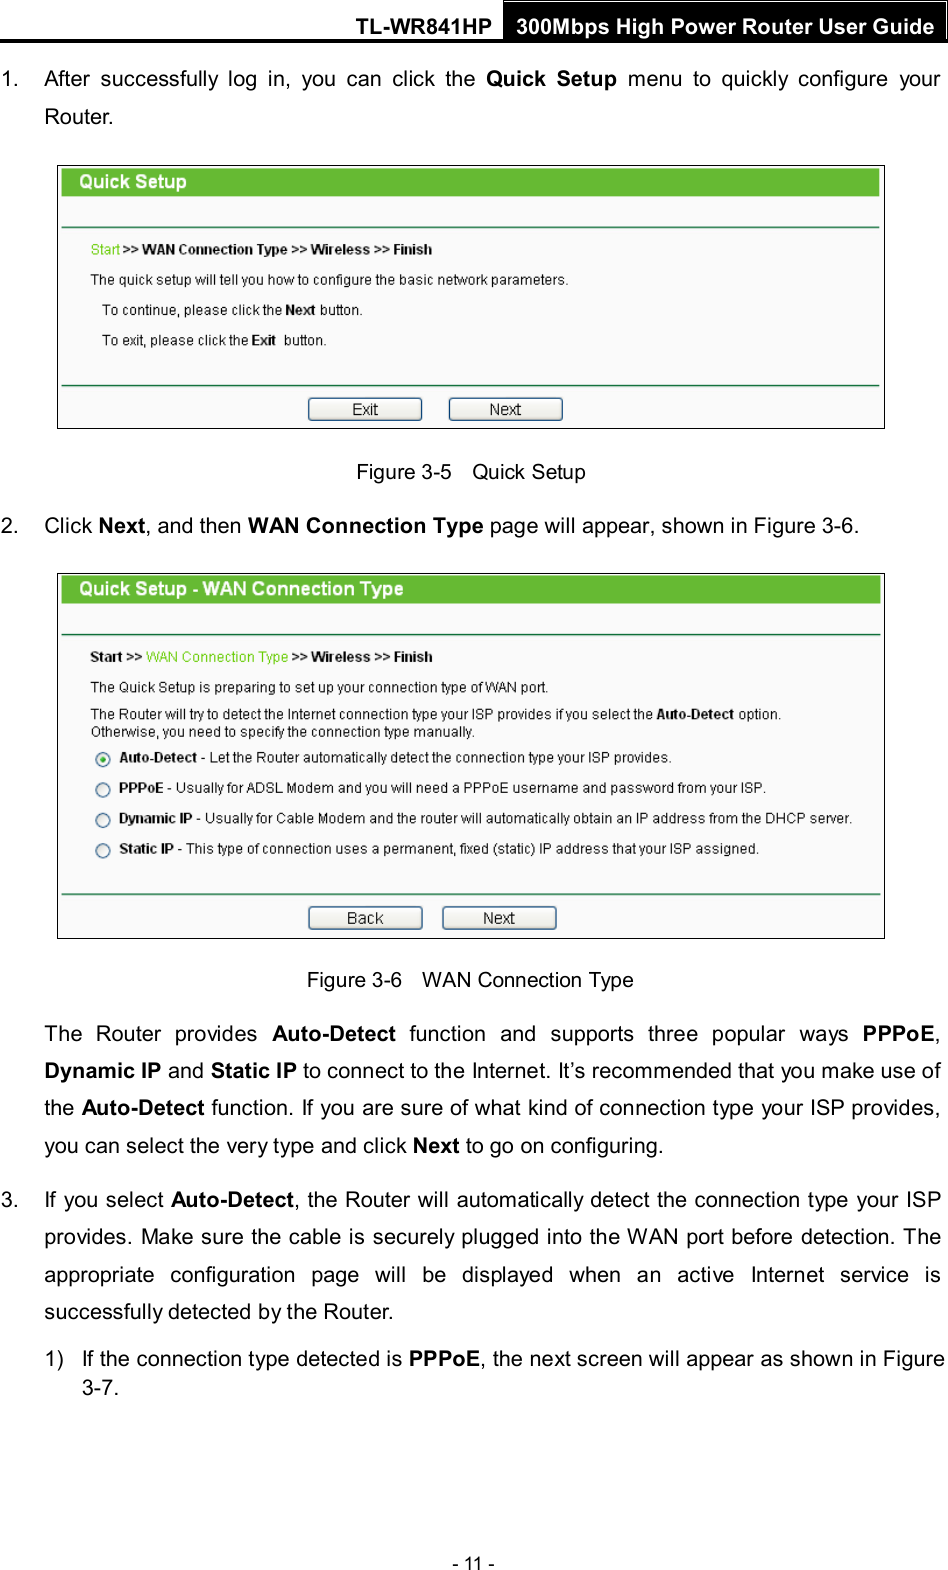 TL-WR841HP 300Mbps High Power Router User Guide  - 11 - 1. After successfully log in, you can click the Quick Setup menu  to quickly configure your Router.    Figure 3-5    Quick Setup 2. Click Next, and then WAN Connection Type page will appear, shown in Figure 3-6.  Figure 3-6    WAN Connection Type The  Router provides  Auto-Detect function and supports three popular ways PPPoE, Dynamic IP and Static IP to connect to the Internet. It’s recommended that you make use of the Auto-Detect function. If you are sure of what kind of connection type your ISP provides, you can select the very type and click Next to go on configuring. 3. If you select Auto-Detect, the Router will automatically detect the connection type your ISP provides. Make sure the cable is securely plugged into the WAN port before detection. The appropriate configuration page will be displayed when an active Internet service is successfully detected by the Router. 1) If the connection type detected is PPPoE, the next screen will appear as shown in Figure 3-7. 